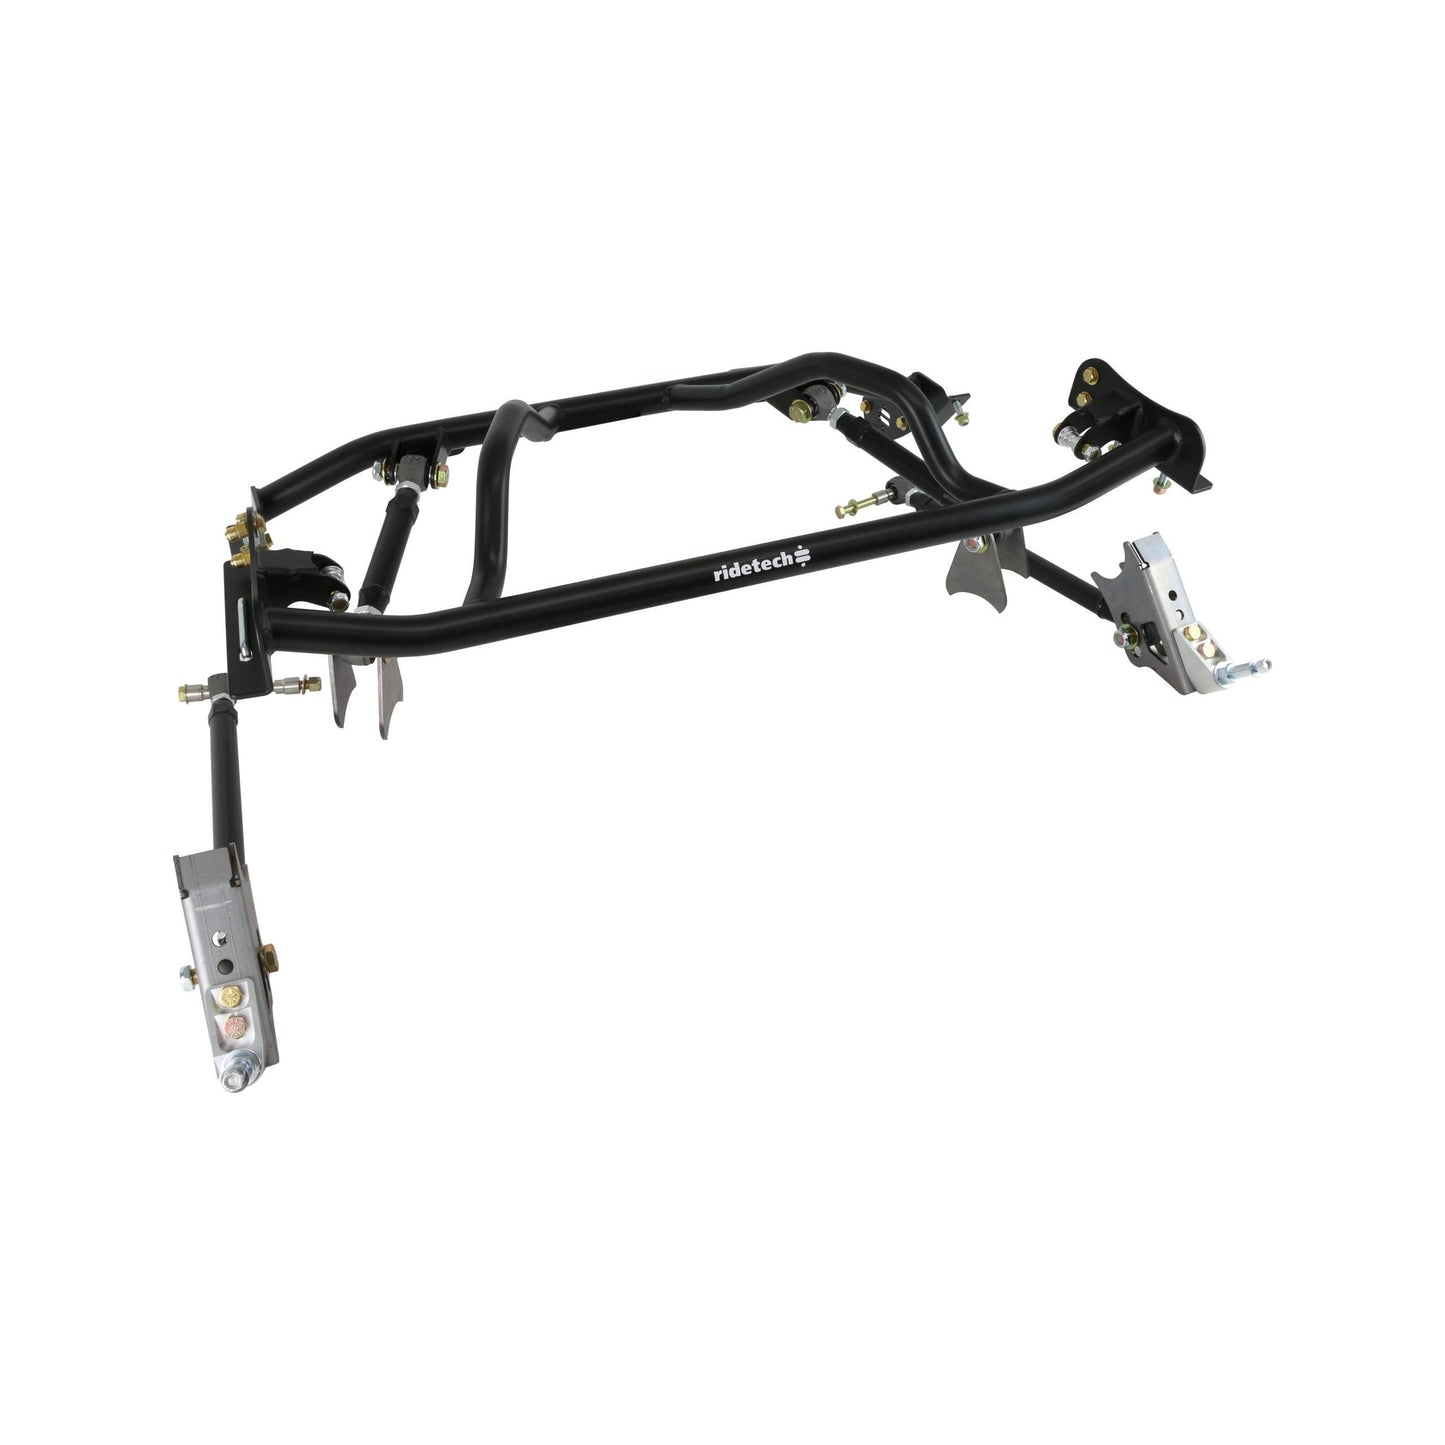 1961-1965 Ford Falcon Rear 4-Link Suspension System - Double Adj.